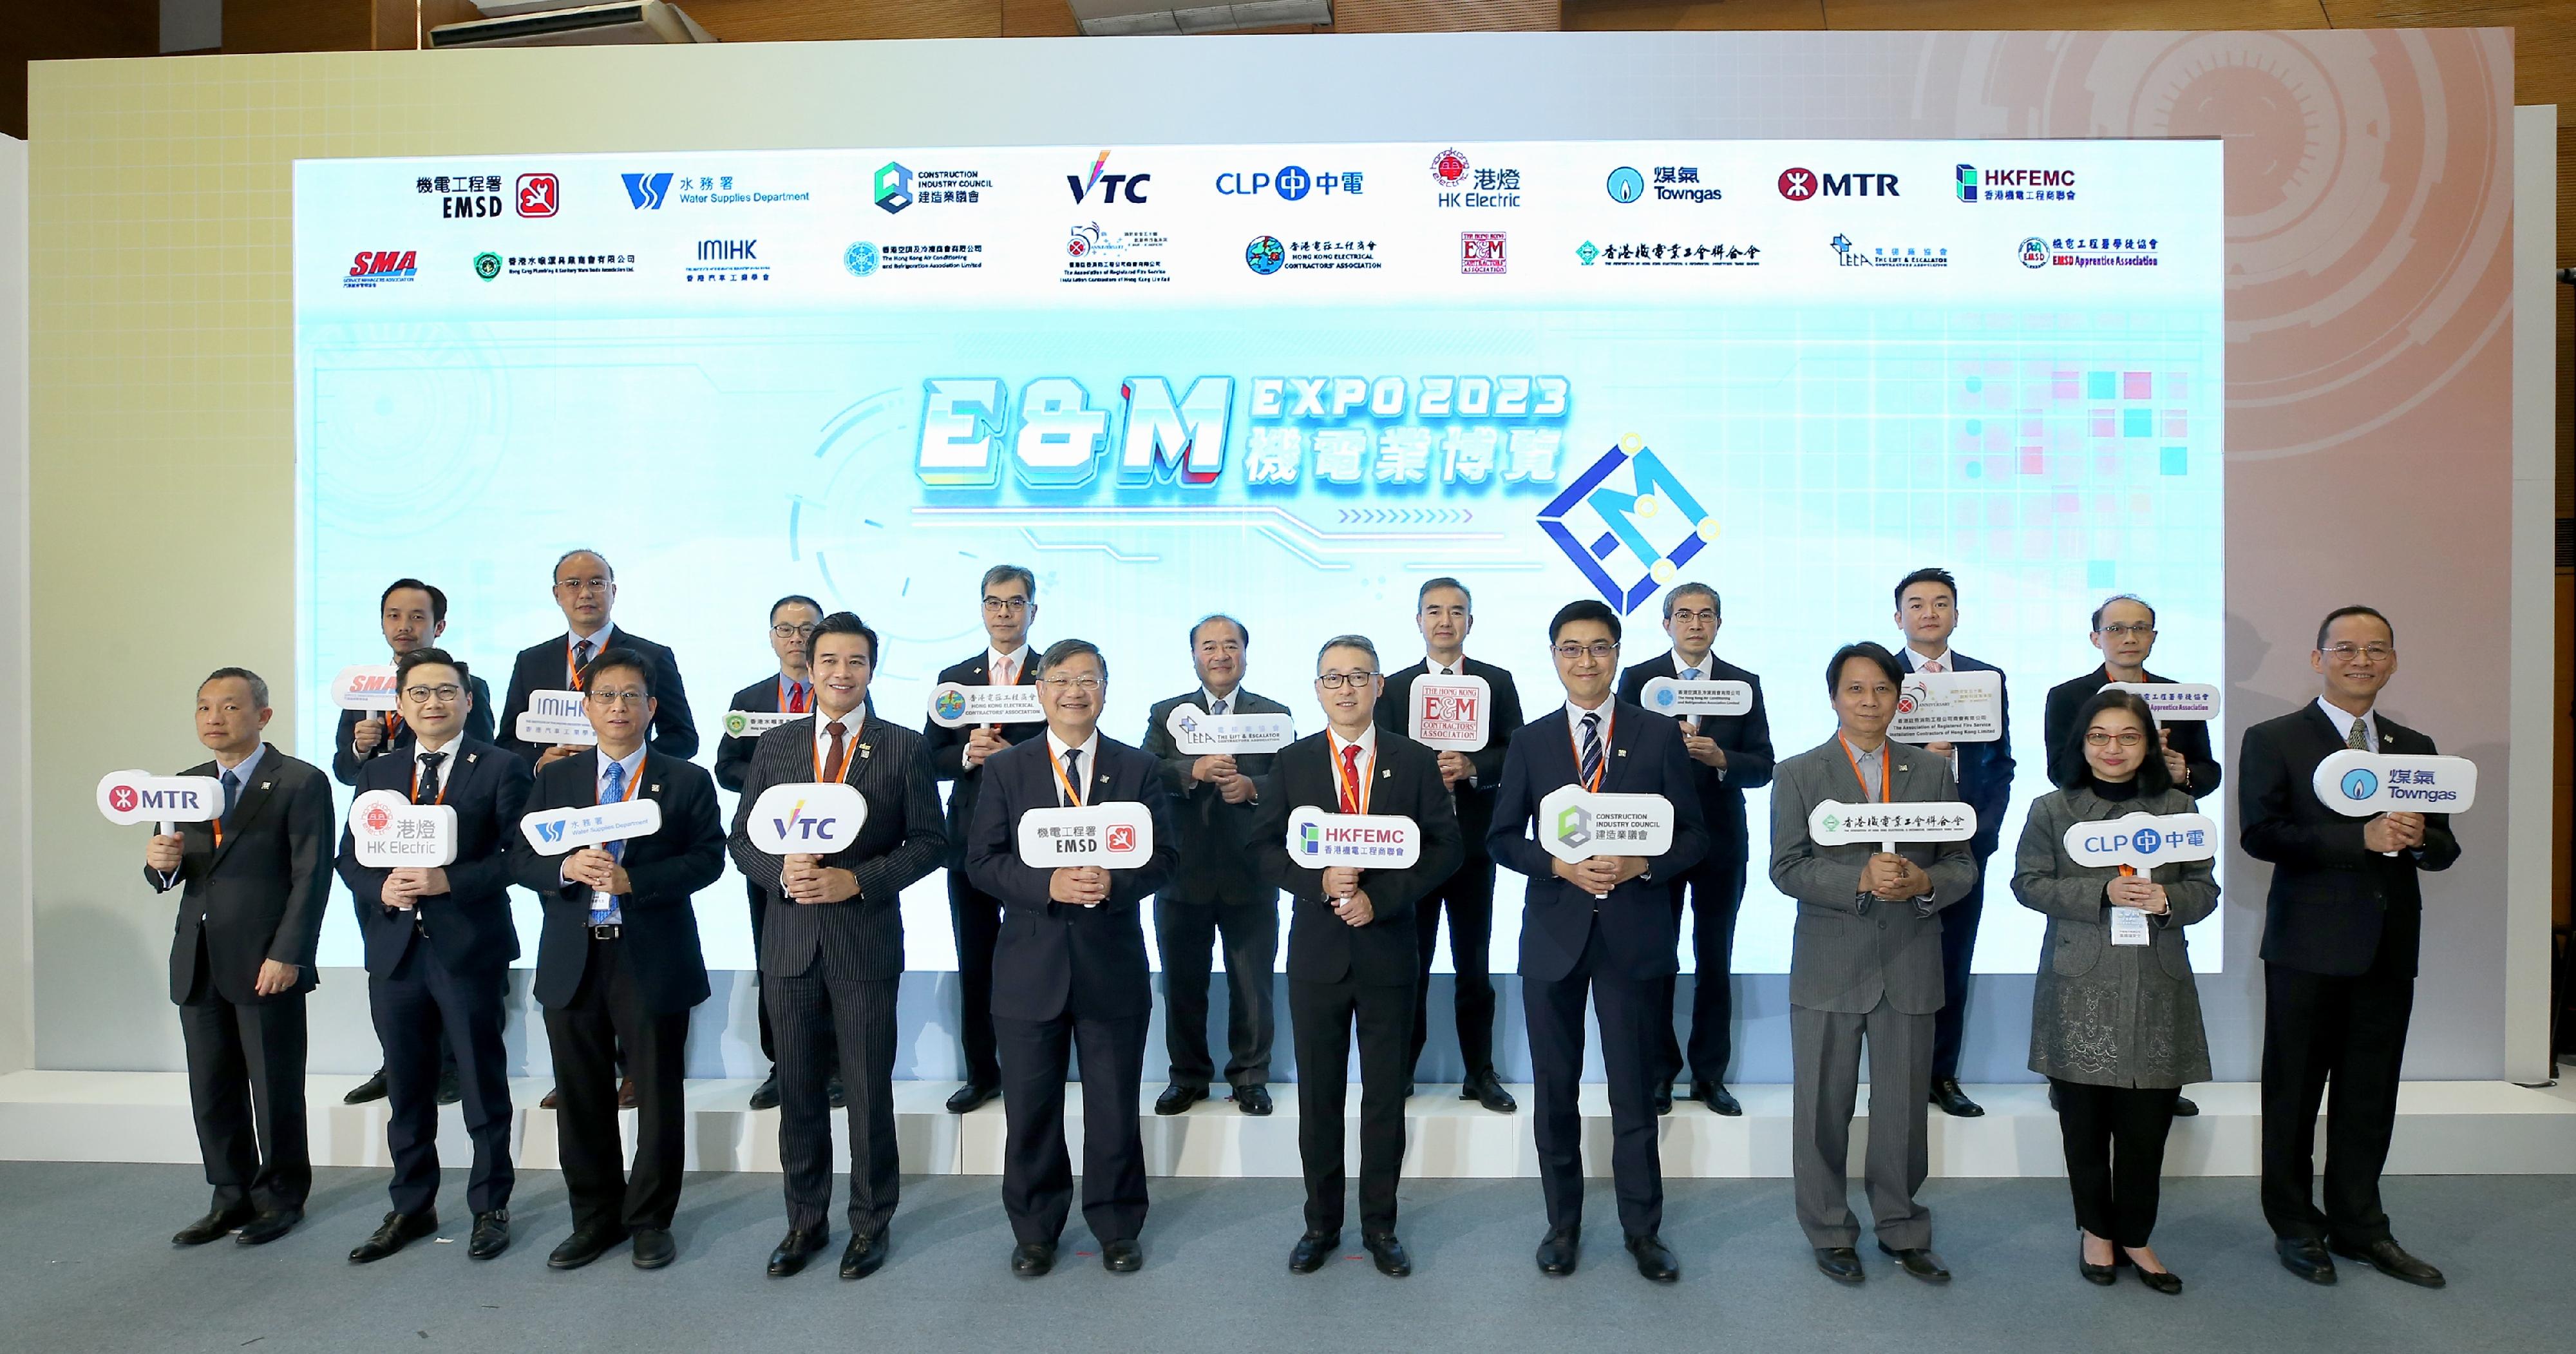 The Electrical and Mechanical Services Department and the Hong Kong Electrical and Mechanical Trade Promotion Working Group today (March 3) jointly held the Electrical and Mechanical Expo 2023. Photo shows the Director of Electrical and Mechanical Services, Mr Eric Pang (front row, fifth left), the representative of the Hong Kong Electrical and Mechanical Trade Promotion Working Group and President of the Hong Kong Federation of Electrical and Mechanical Contractors Limited, Mr Rocky Poon (front row, fifth right), and other representatives of the Working Group at the opening ceremony.